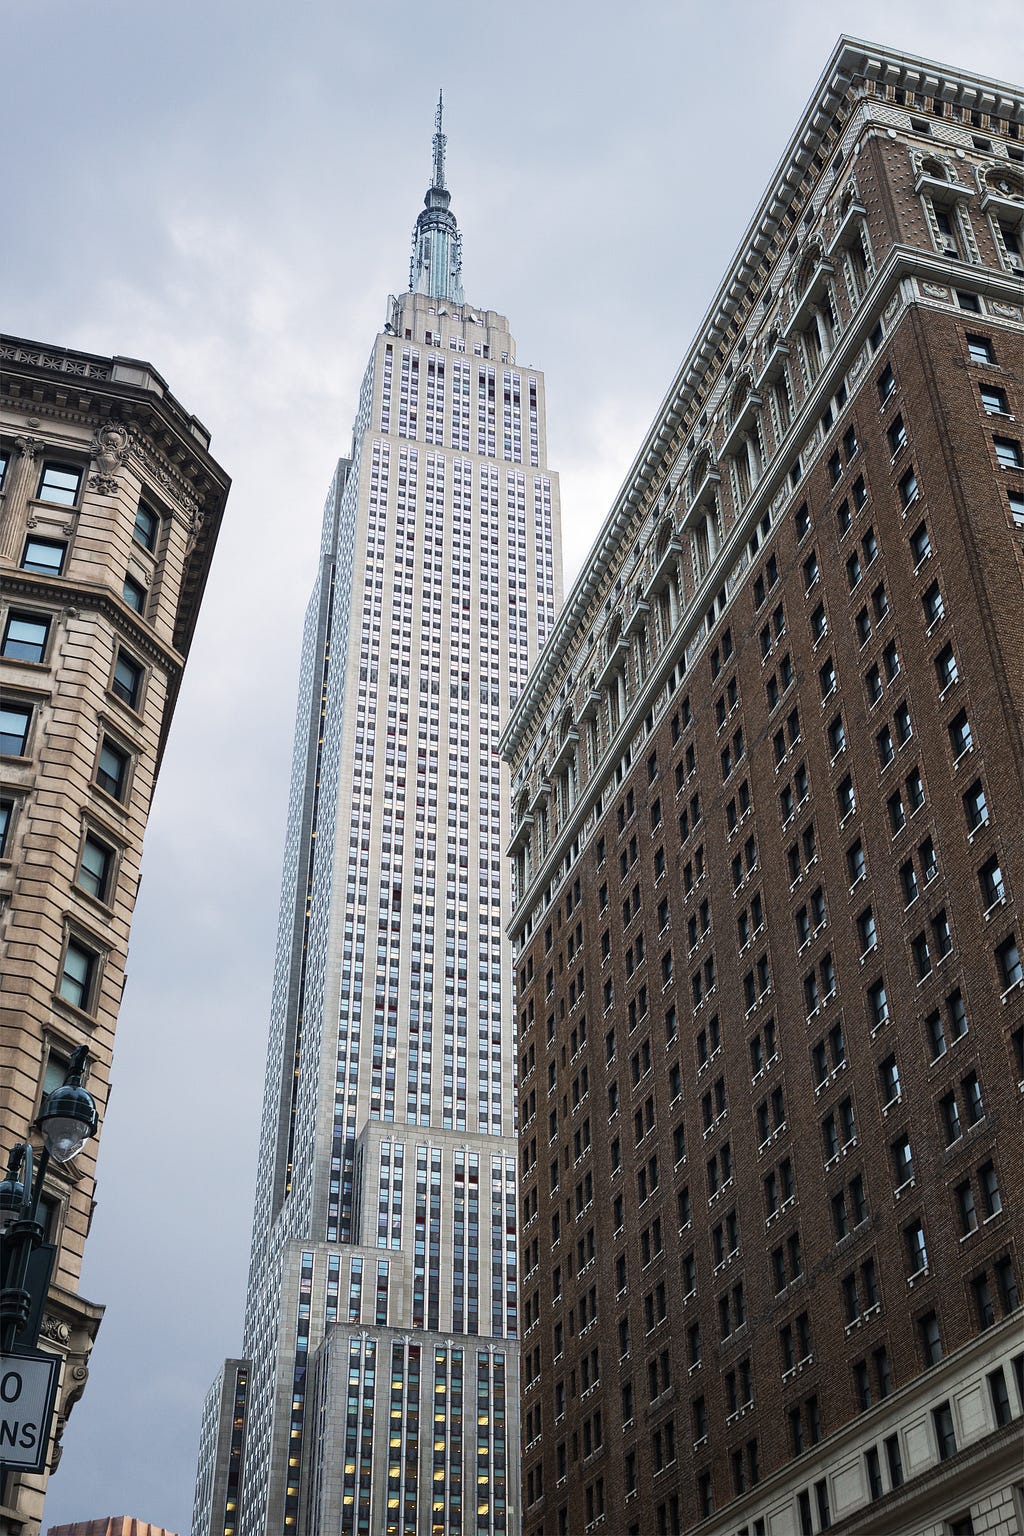 Image of the Empire State Building, image credit Adobe Stock. https://stock.adobe.com/images/view-looking-up-of-the-empire-state-building-seen-from-herald-square-new-york-city-united-states/280146426?prev_url=detail&asset_id=280146426